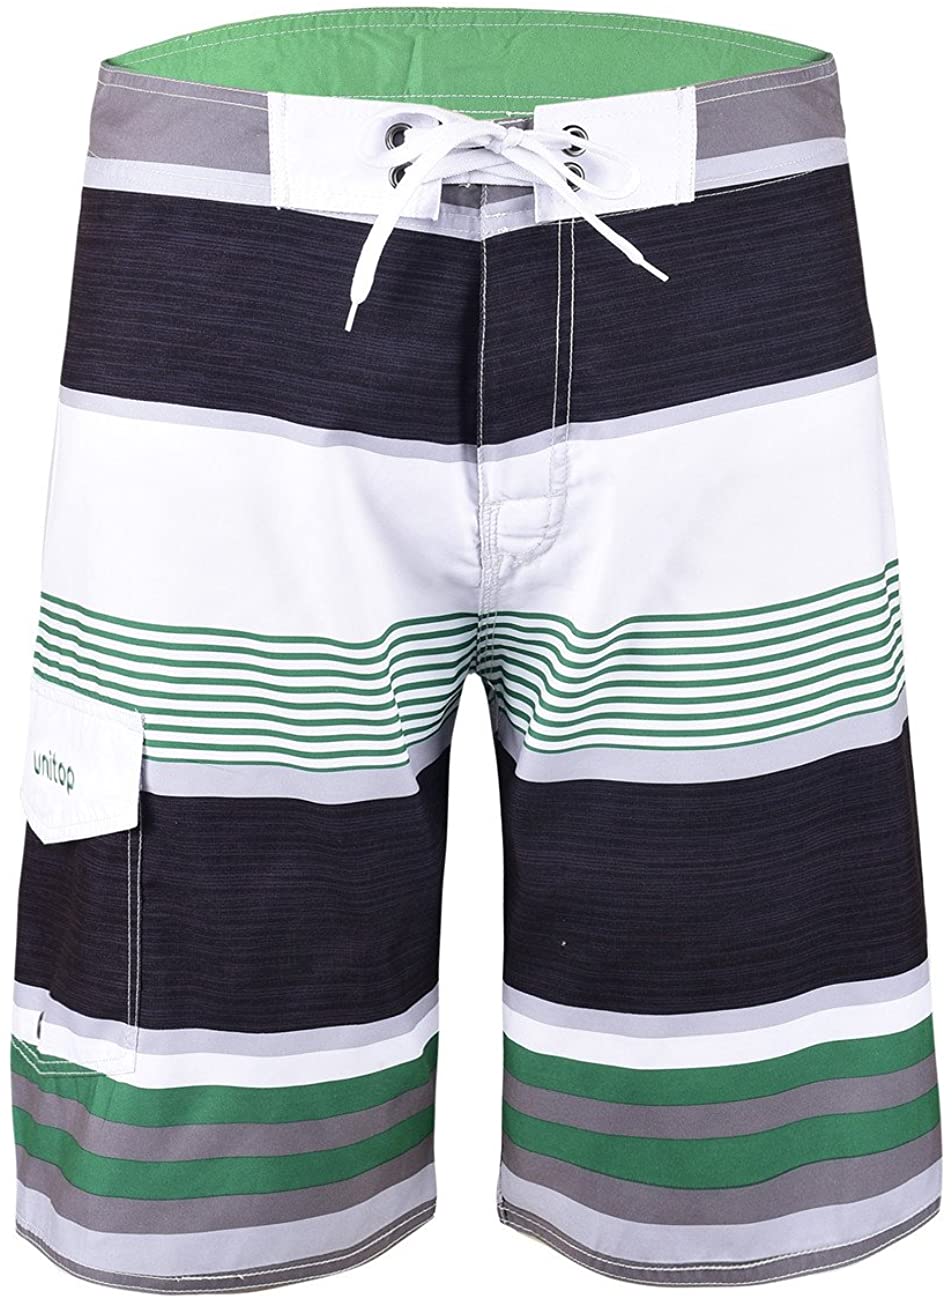 unitop Men's Beachwear Striped Printed Fast Dry Surf Trunks with Side Pocket 